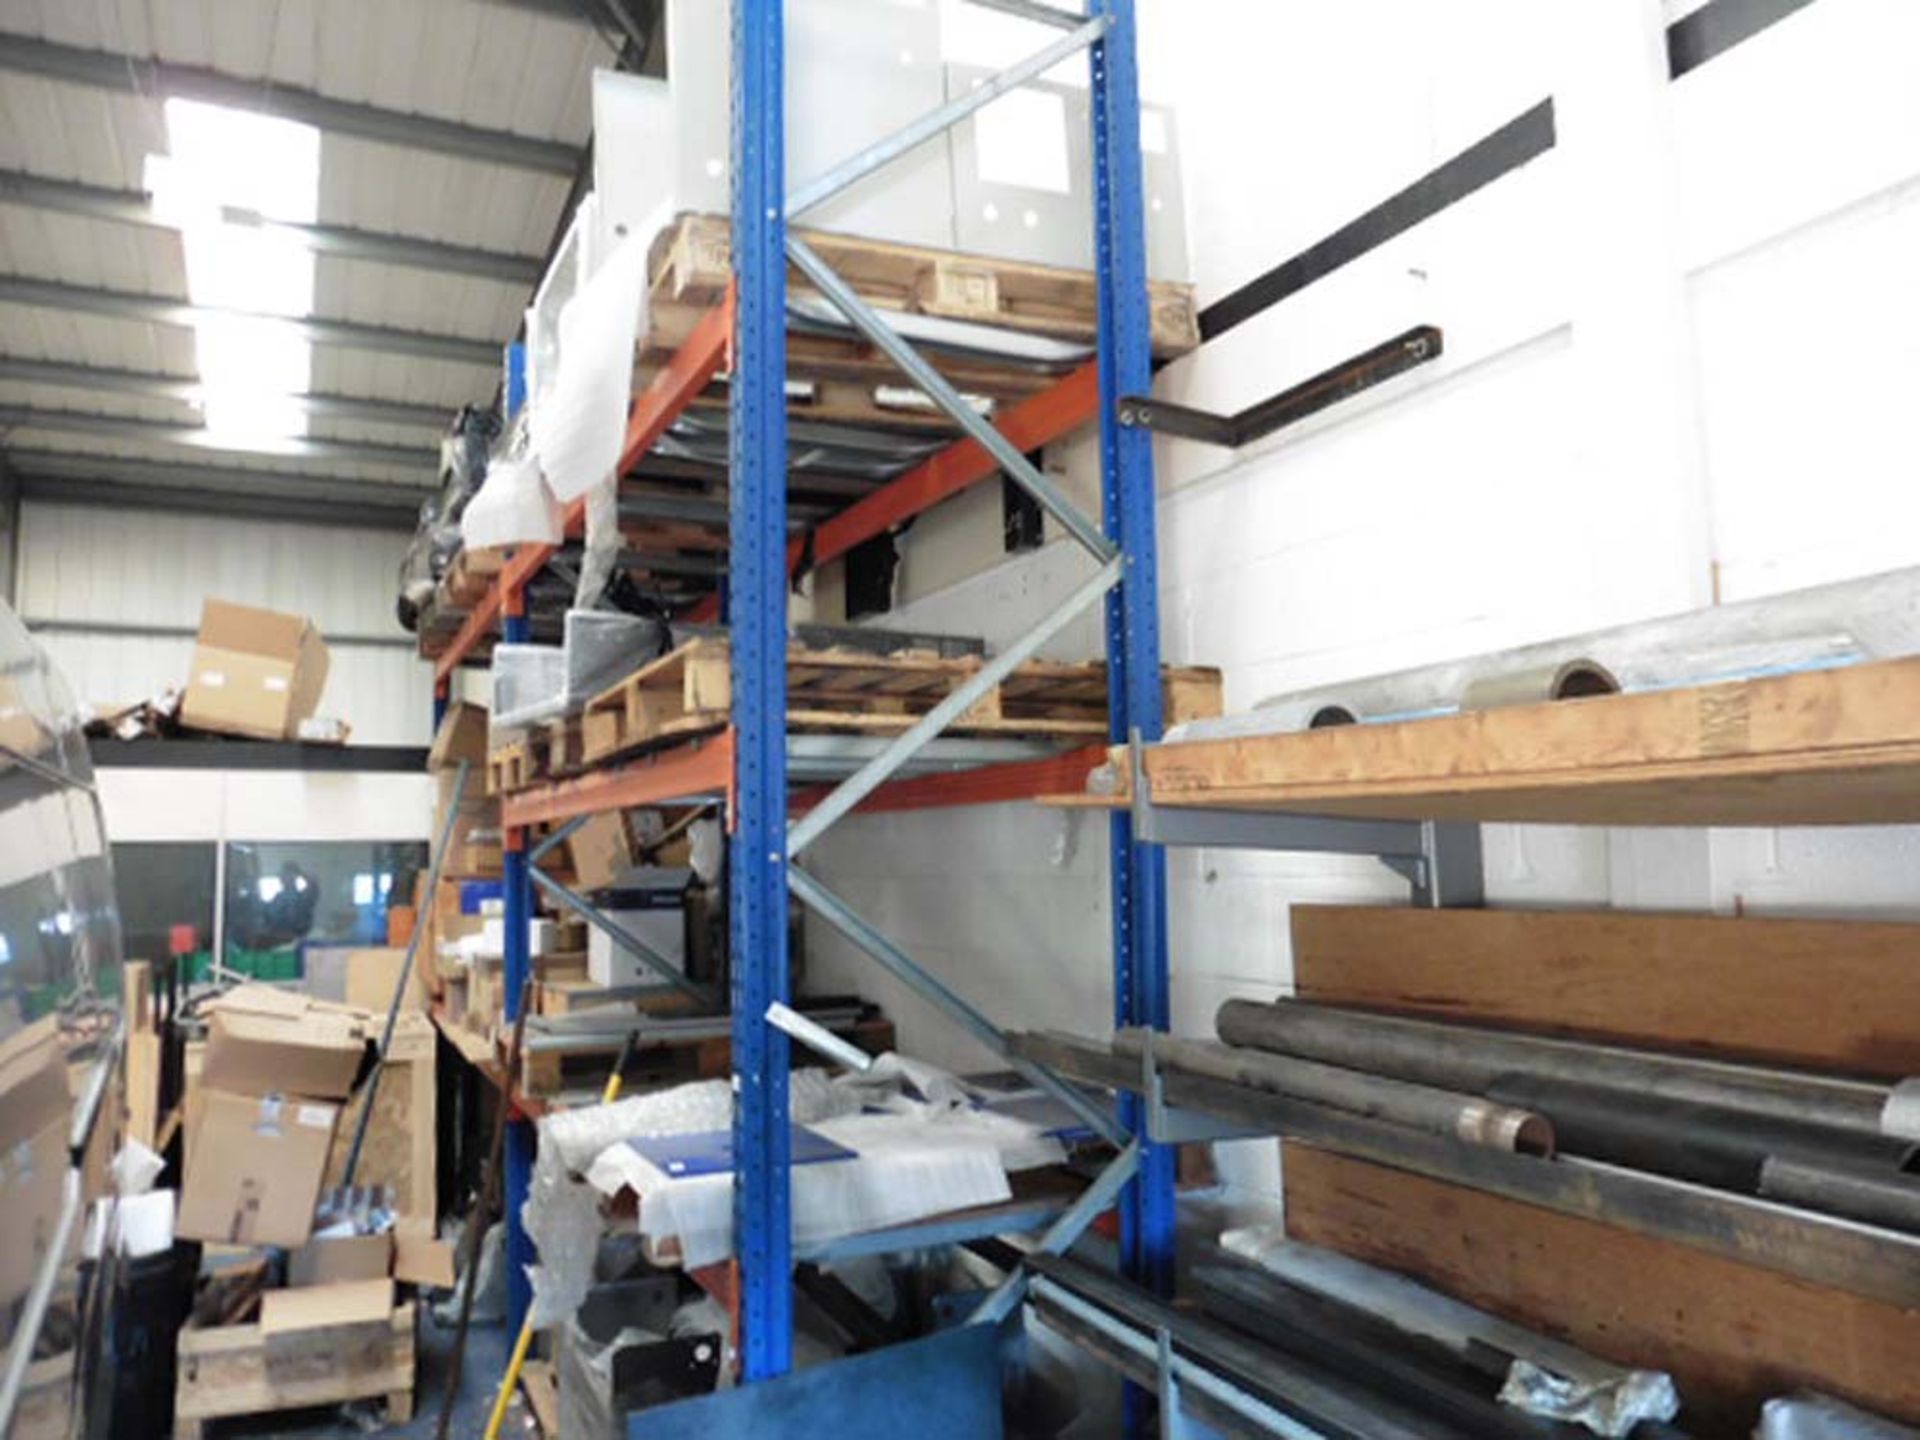 a Double bay of pallet racking comprising 3 blue 14' uprights and 5 pairs of beams